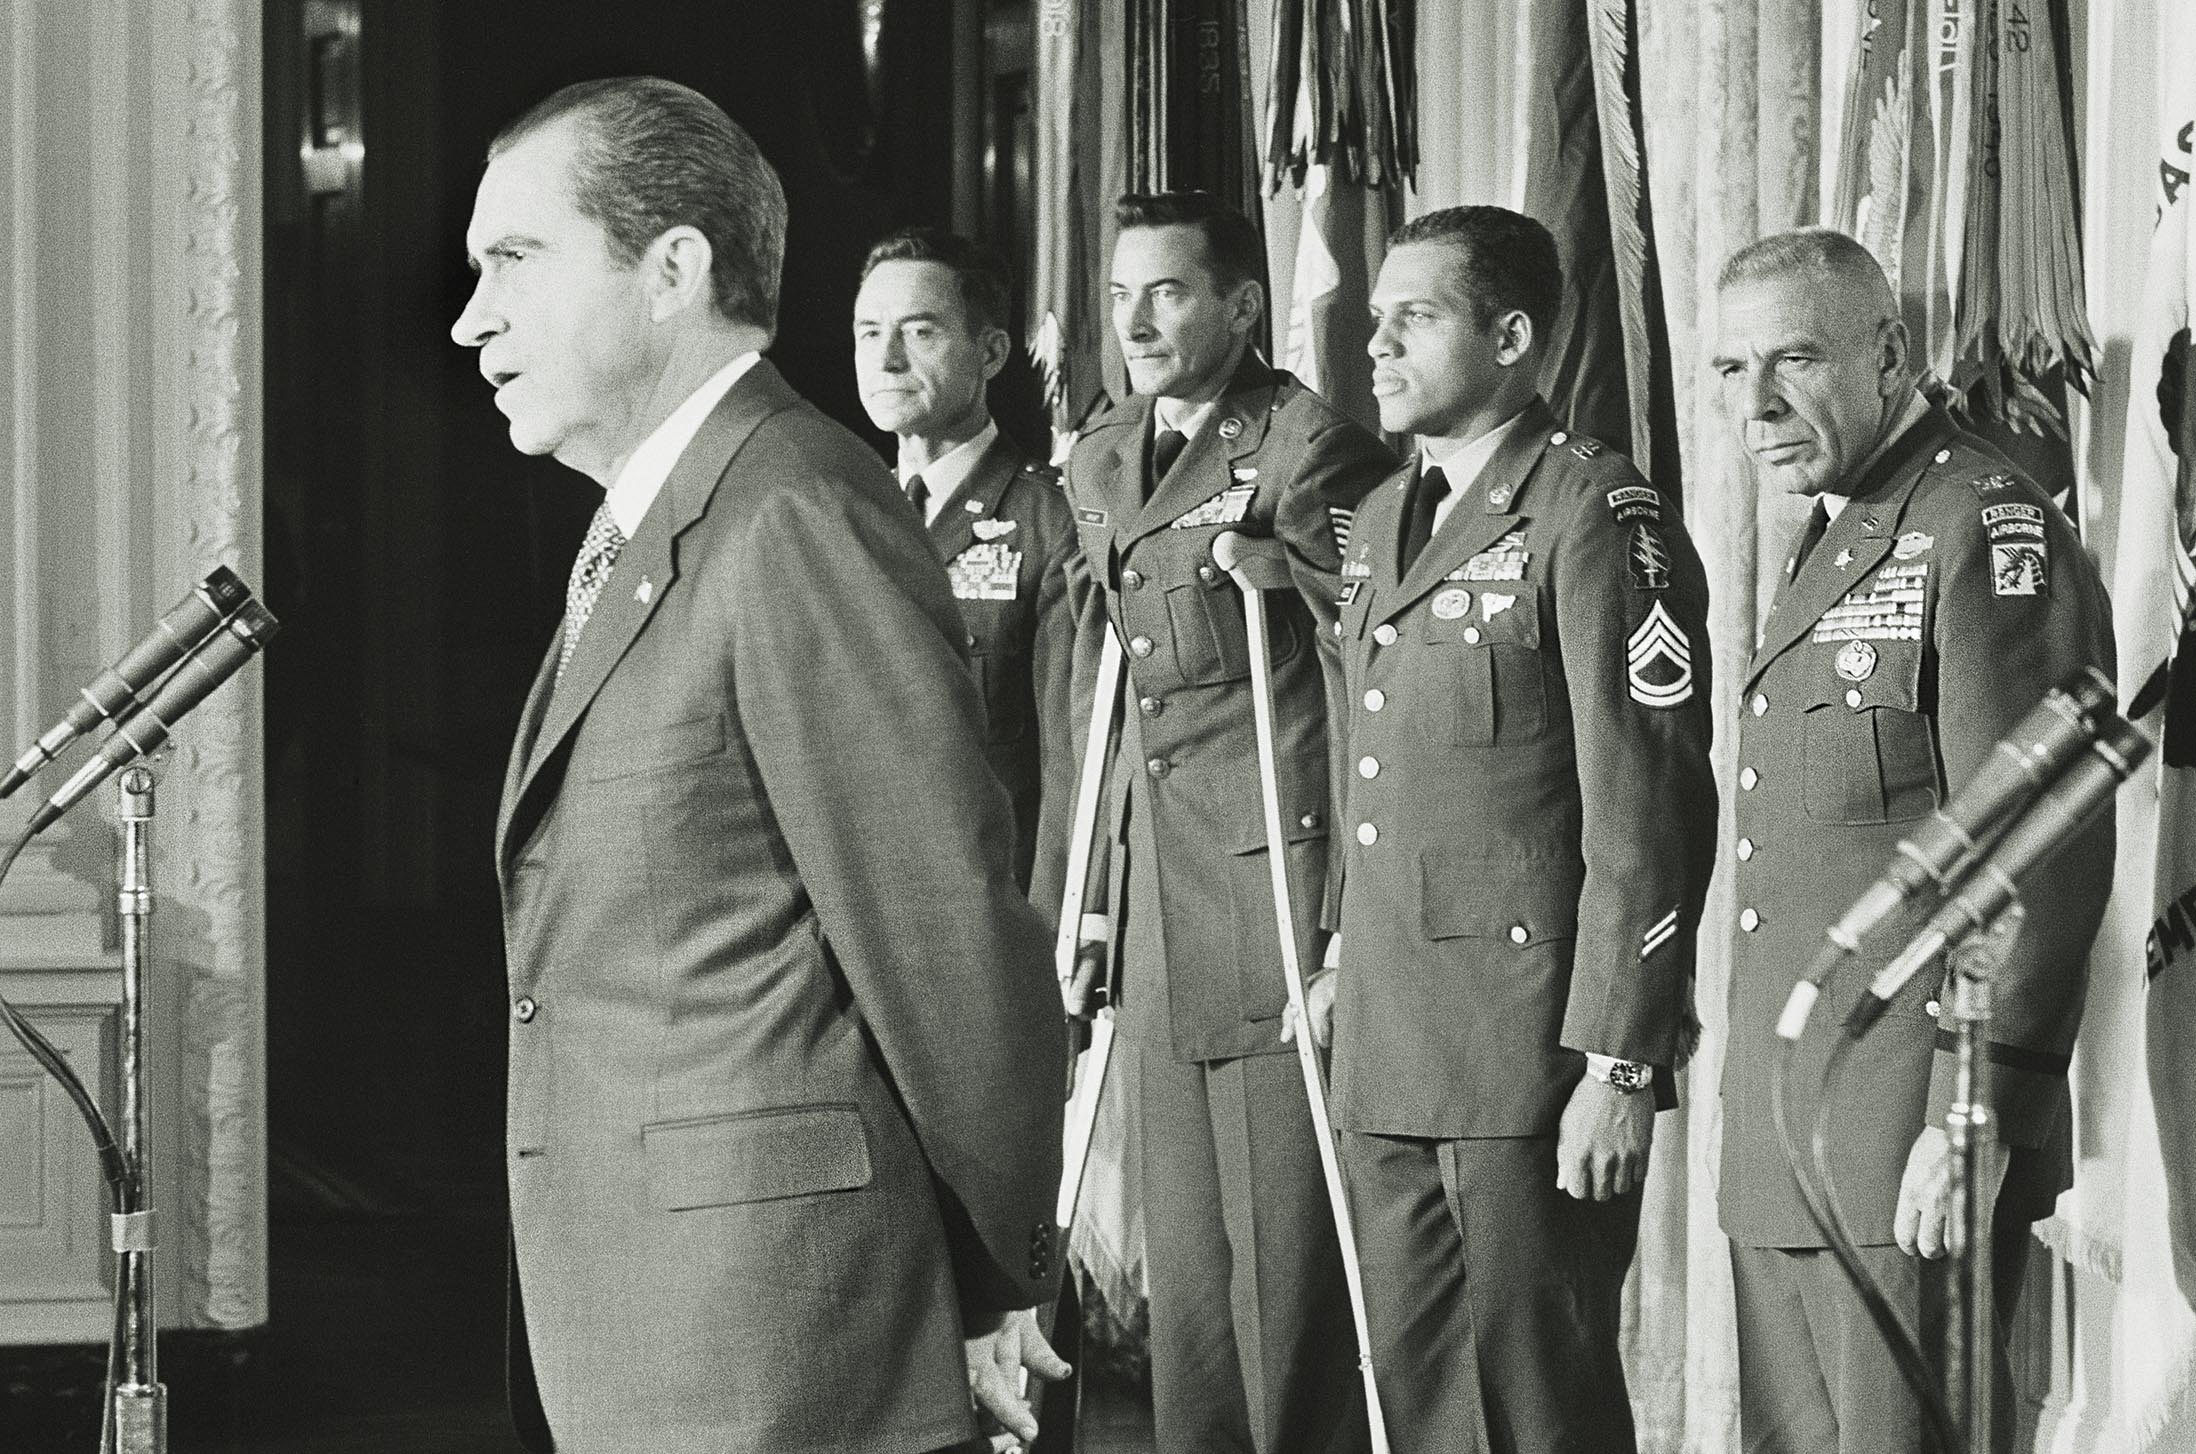 President Richard Nixon honors the Son Tay raiders during an awards ceremony on Nov. 25, 1970. From left are Brig. Gen. LeRoy Manor, Tech. Sgt. Leroy Wright, Sgt. 1st Class Tyrone Adderly and Col. Arthur Simons.